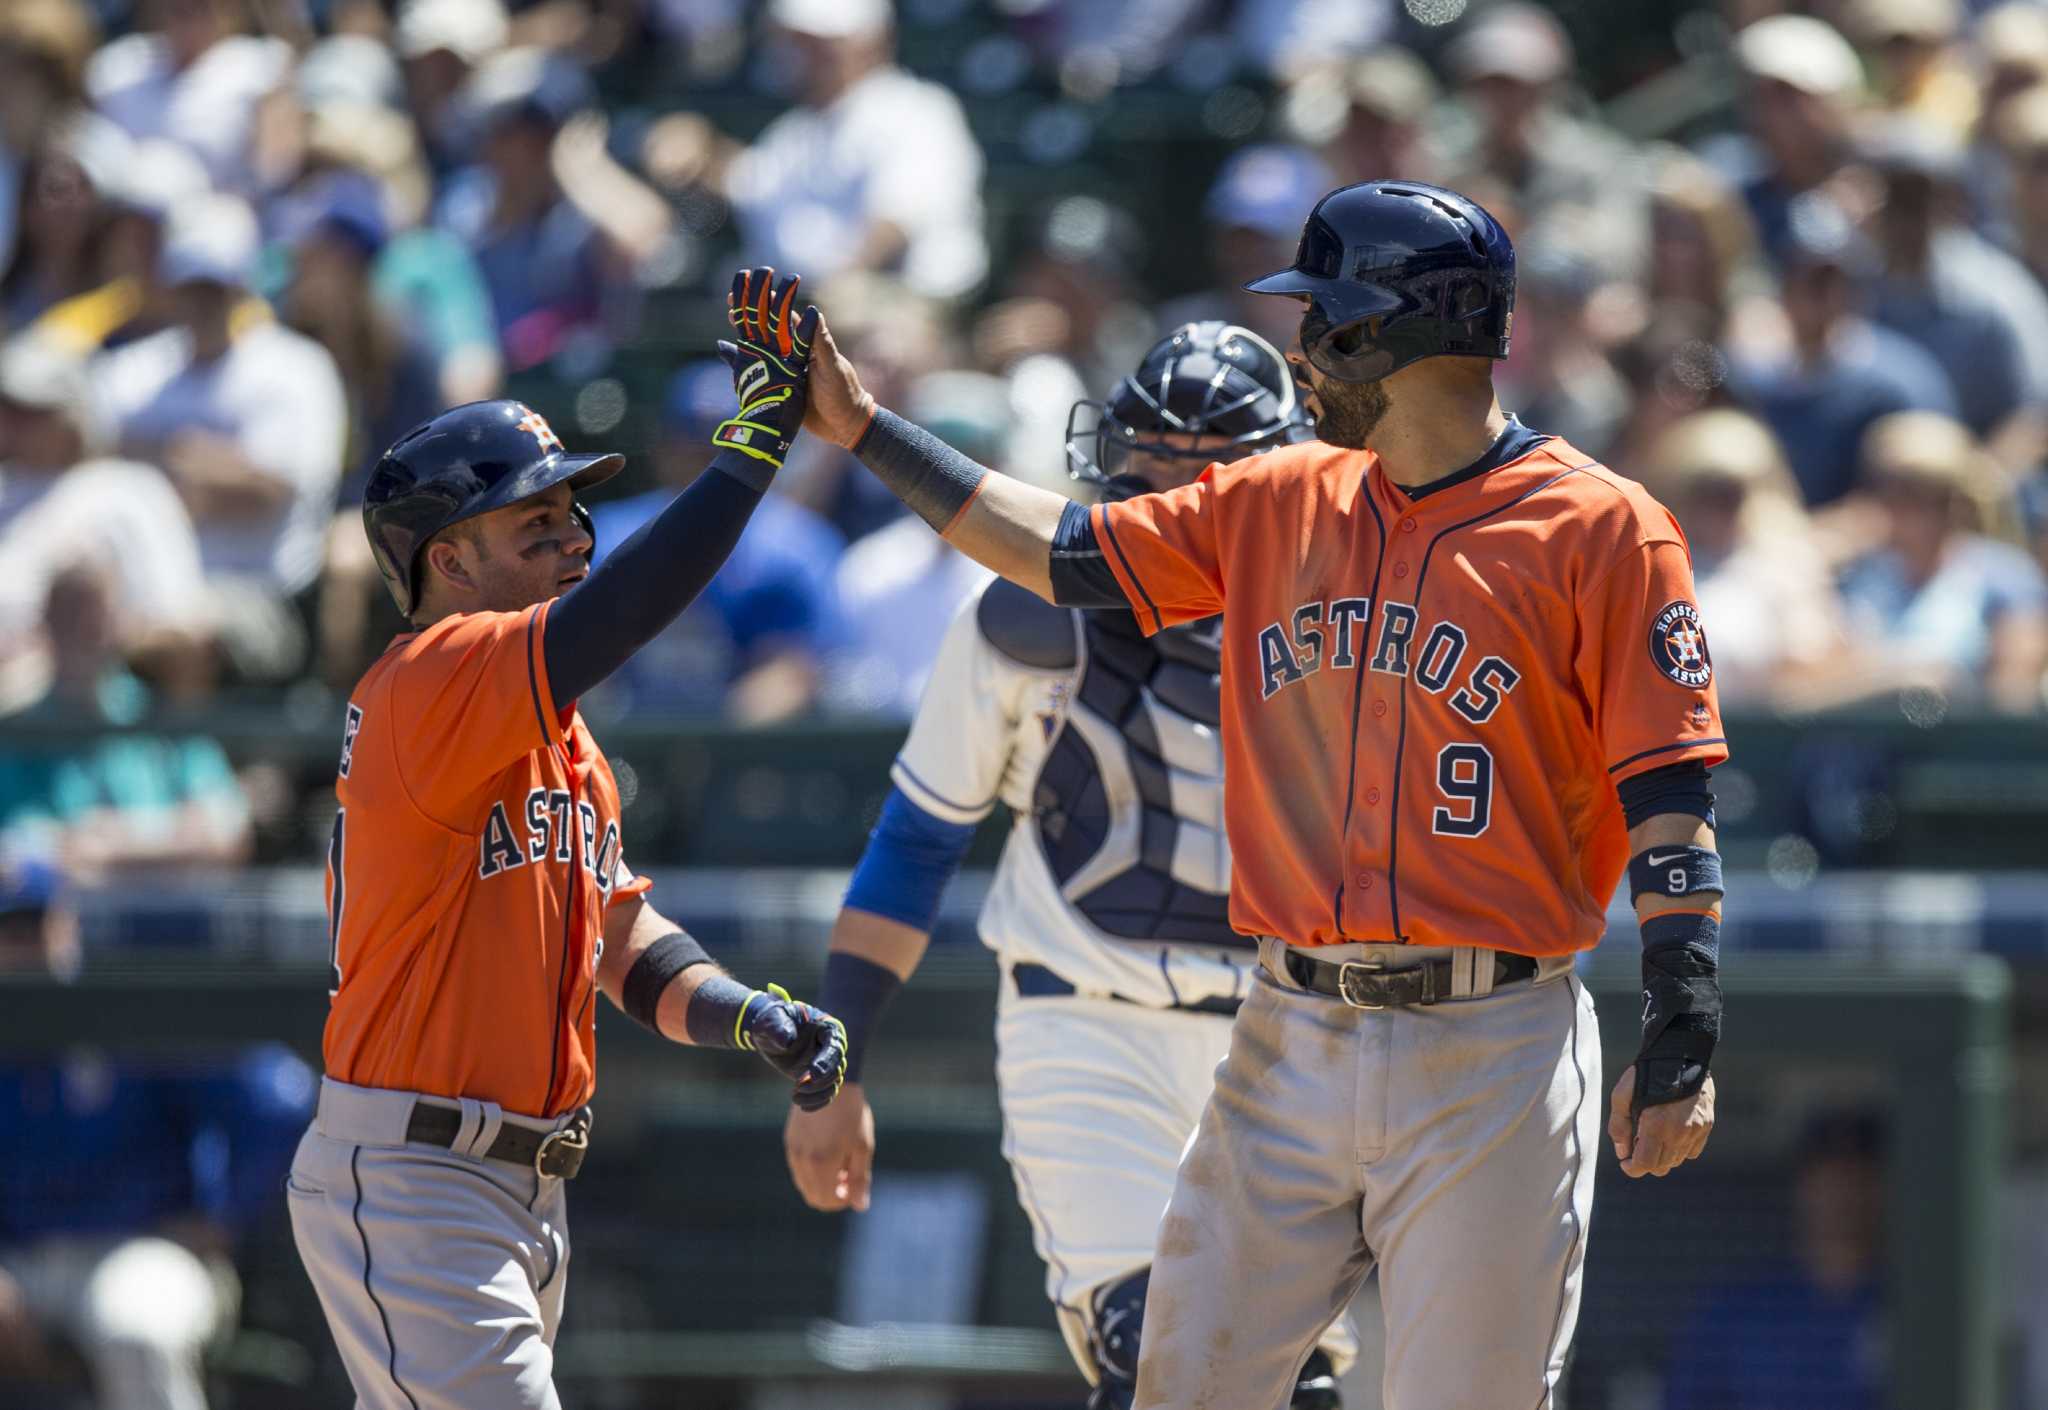 Astros beat Mariners in series finale to earn 50th win